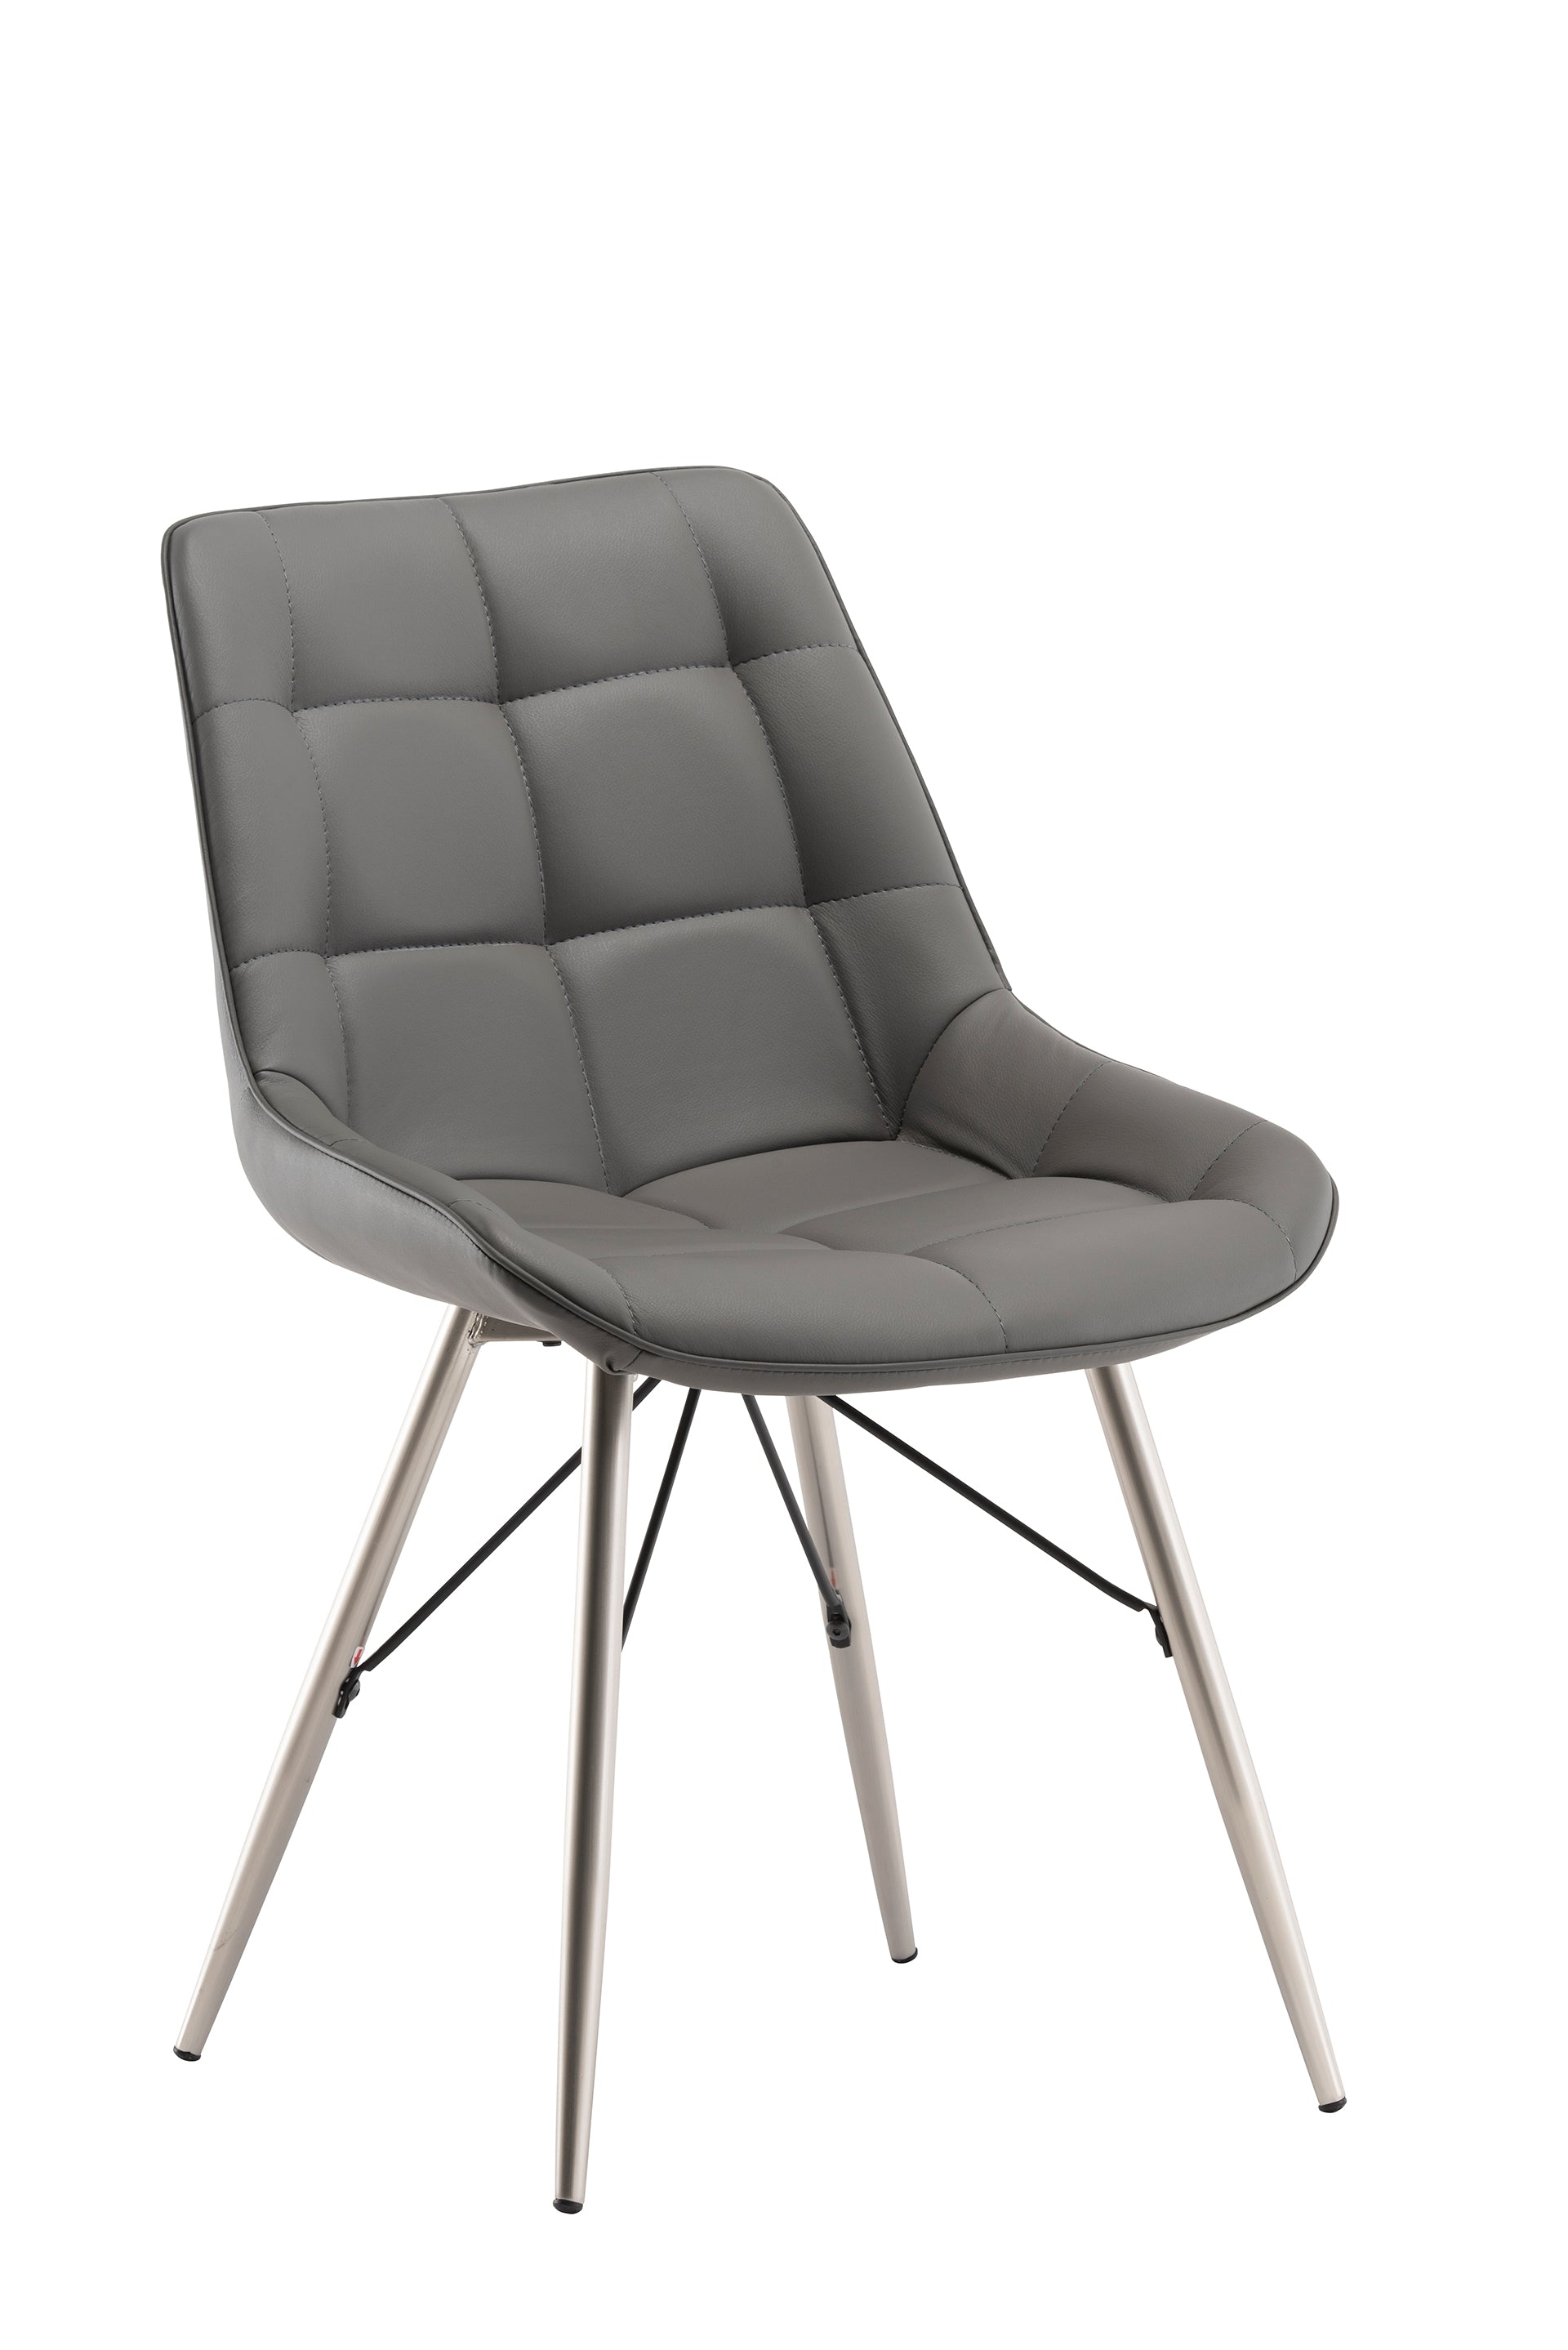 Astra Faux Leather / Fabric Nickel Brushed Leg Dining Chair (Pairs), Grey – Lc Living